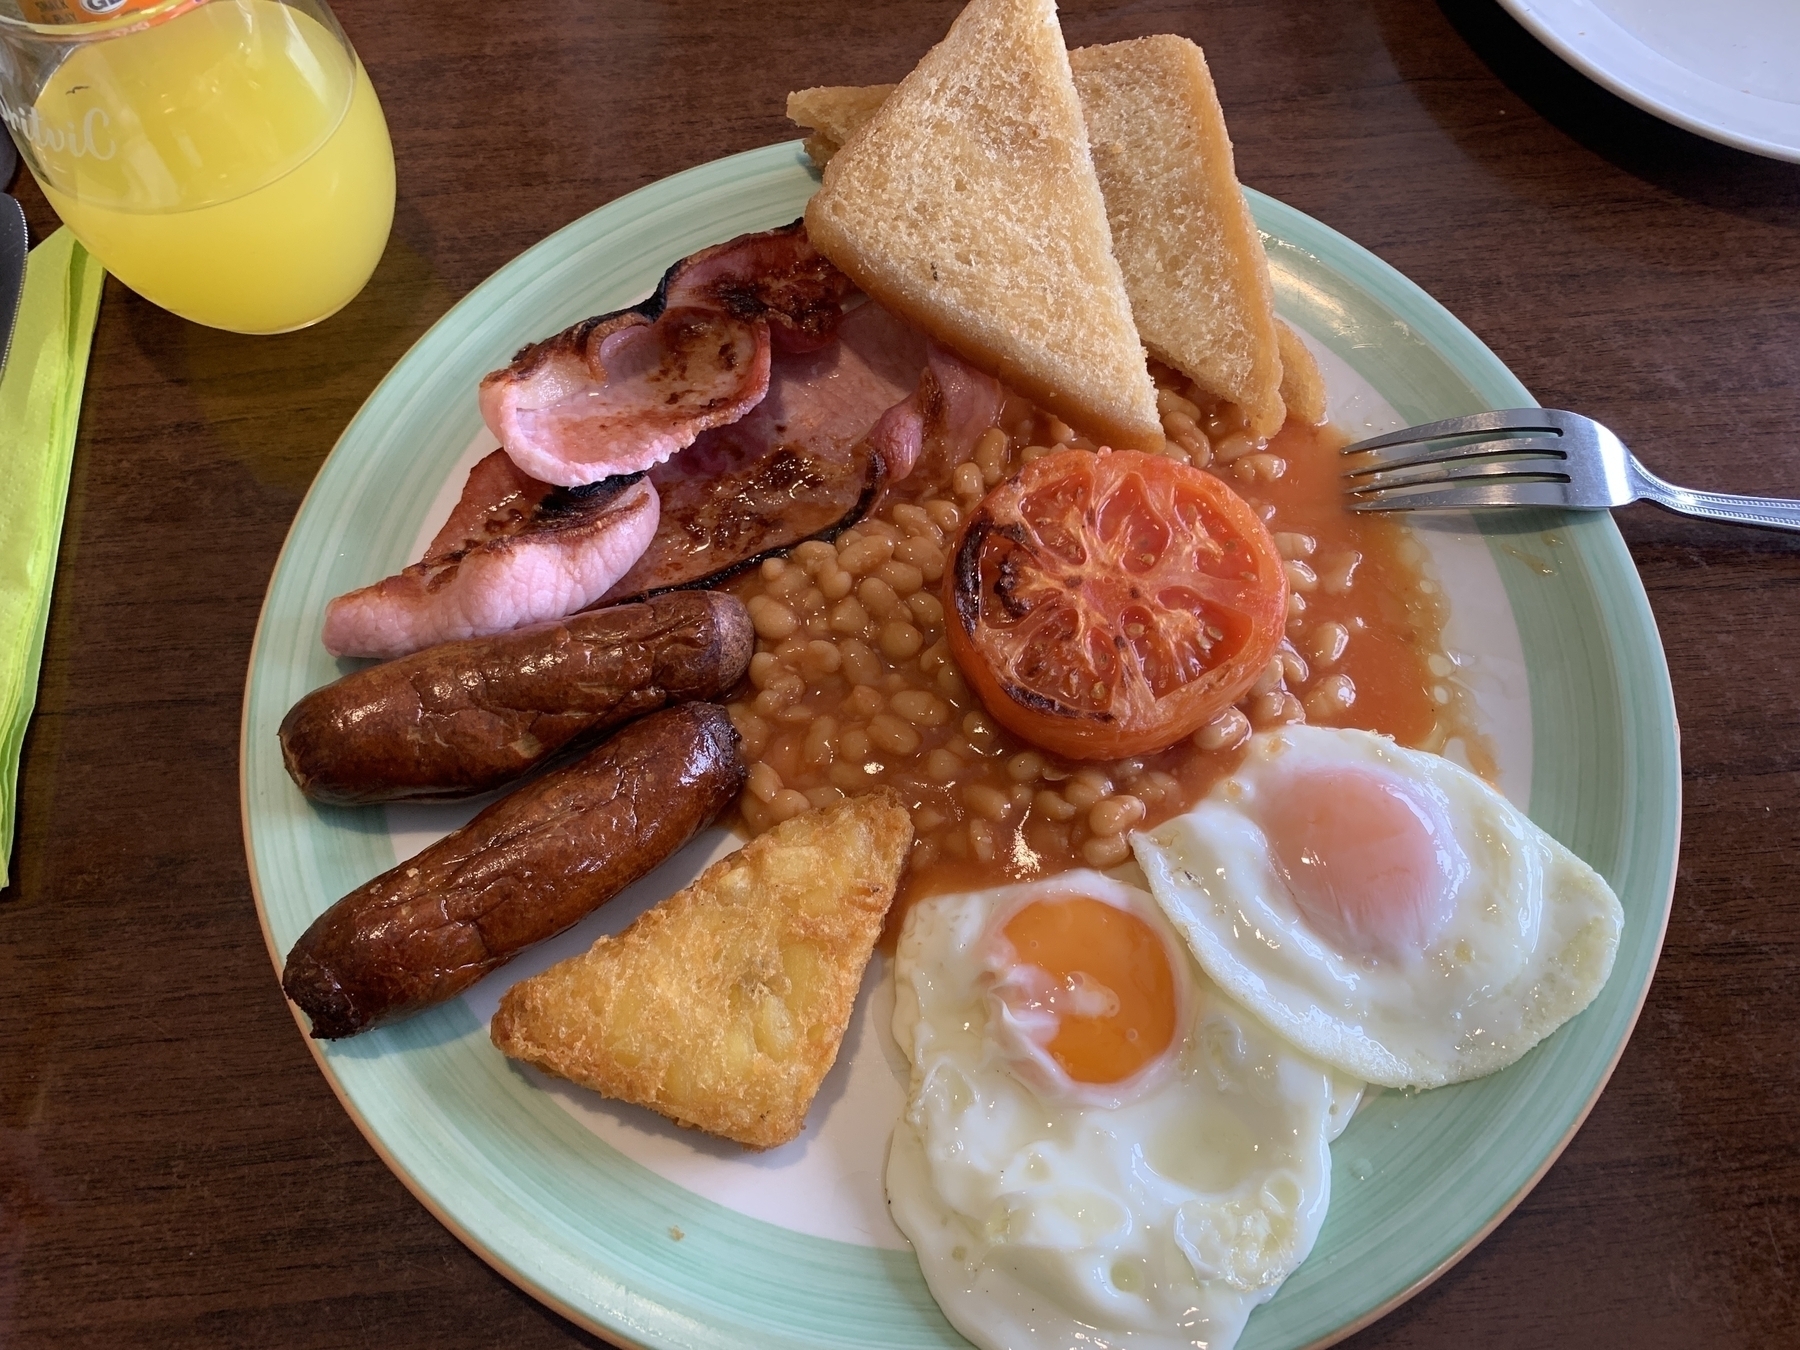 Large traditional breakfast on a blue/green plate. The breakfast includes 2 slices of fried-bread, 2 sunny-side up eggs, 1 hash-brown, 2 sausages, 2 slices of bacon, half a large fried tomato and a large portion of baked beans. My fork is sitting on the right side of the plate. In the background is a glass of fanta and a dark wooden table